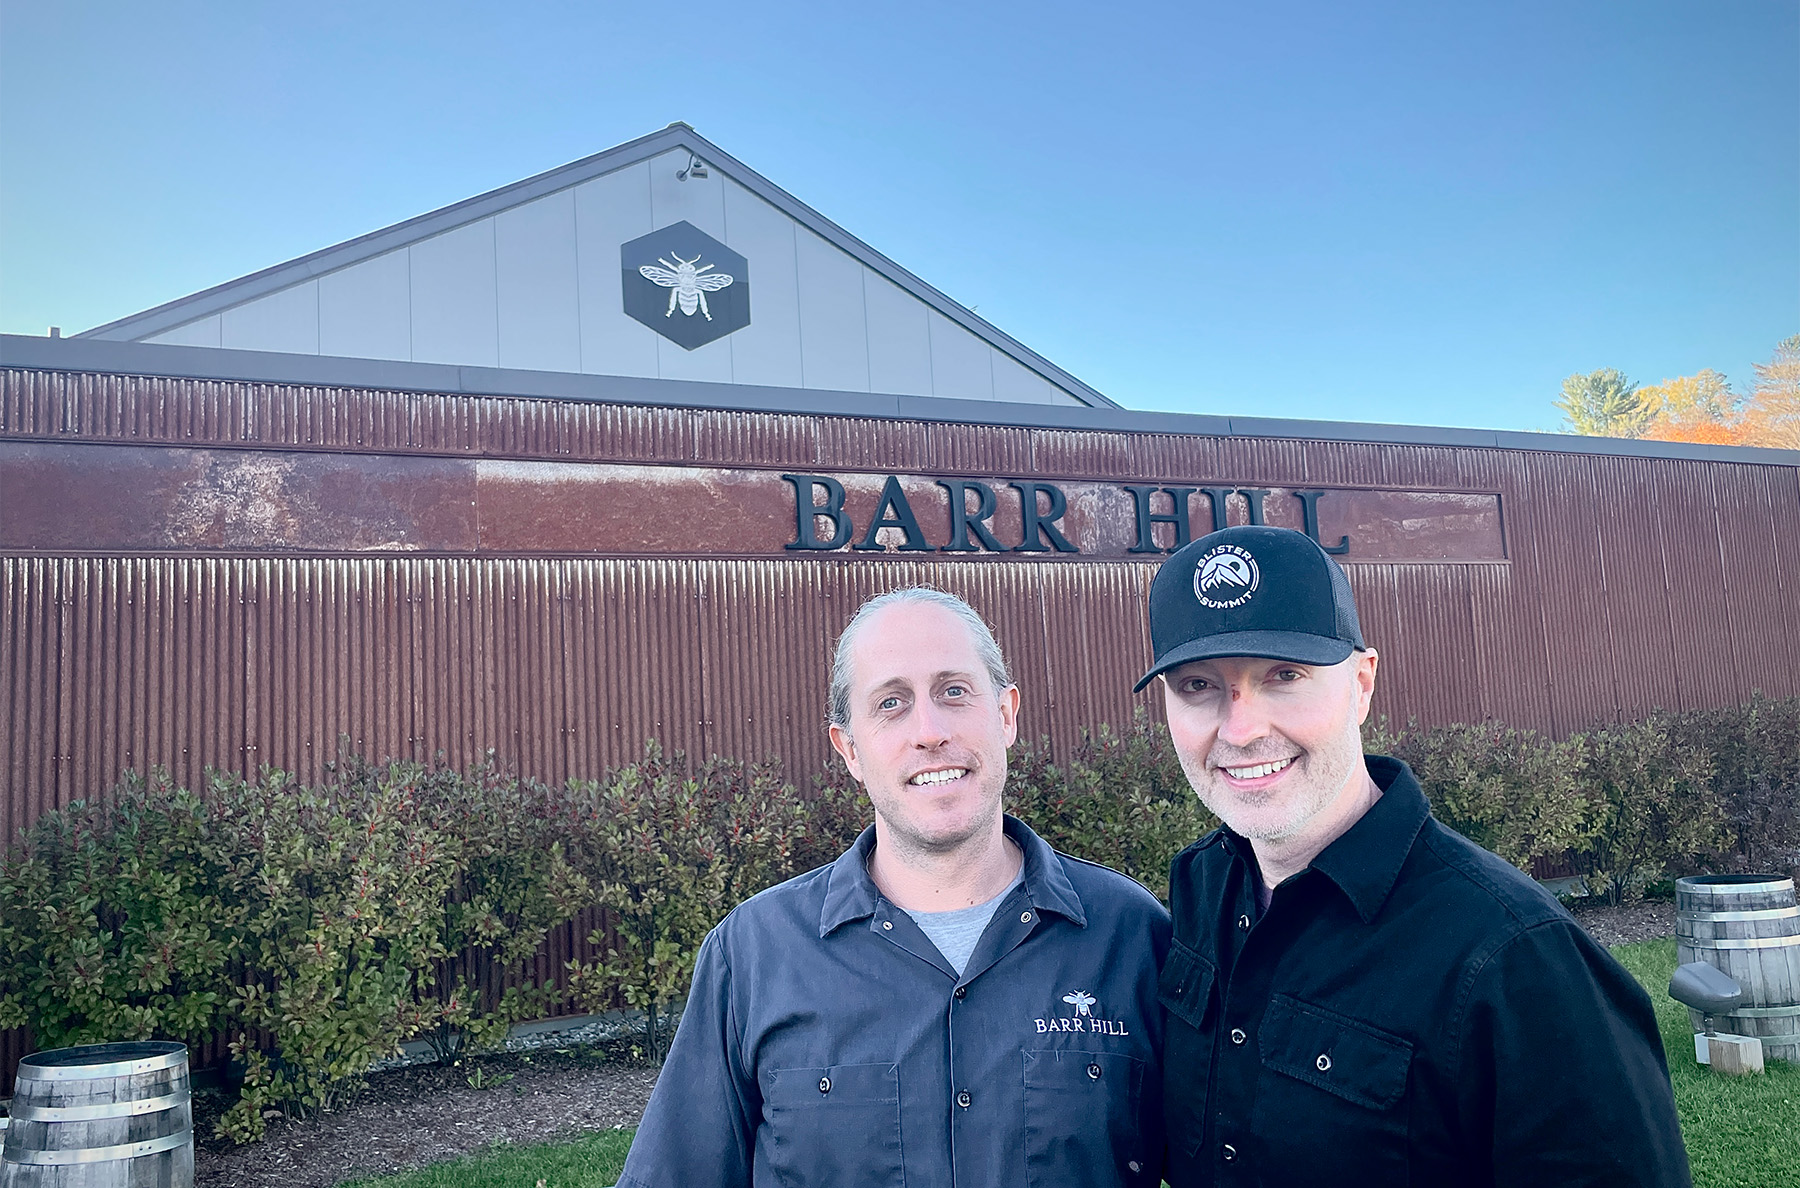 On Blister's CRAFTED podcast, We talk with Barr Hill president and distiller, Ryan Christiansen, about bees and pollinators; the process of producing exceptional gin; what makes their Barr Hill vodka unique; the impact of their ‘Bees Knees Week’ initiative; their foray into the world of whiskey; and more.